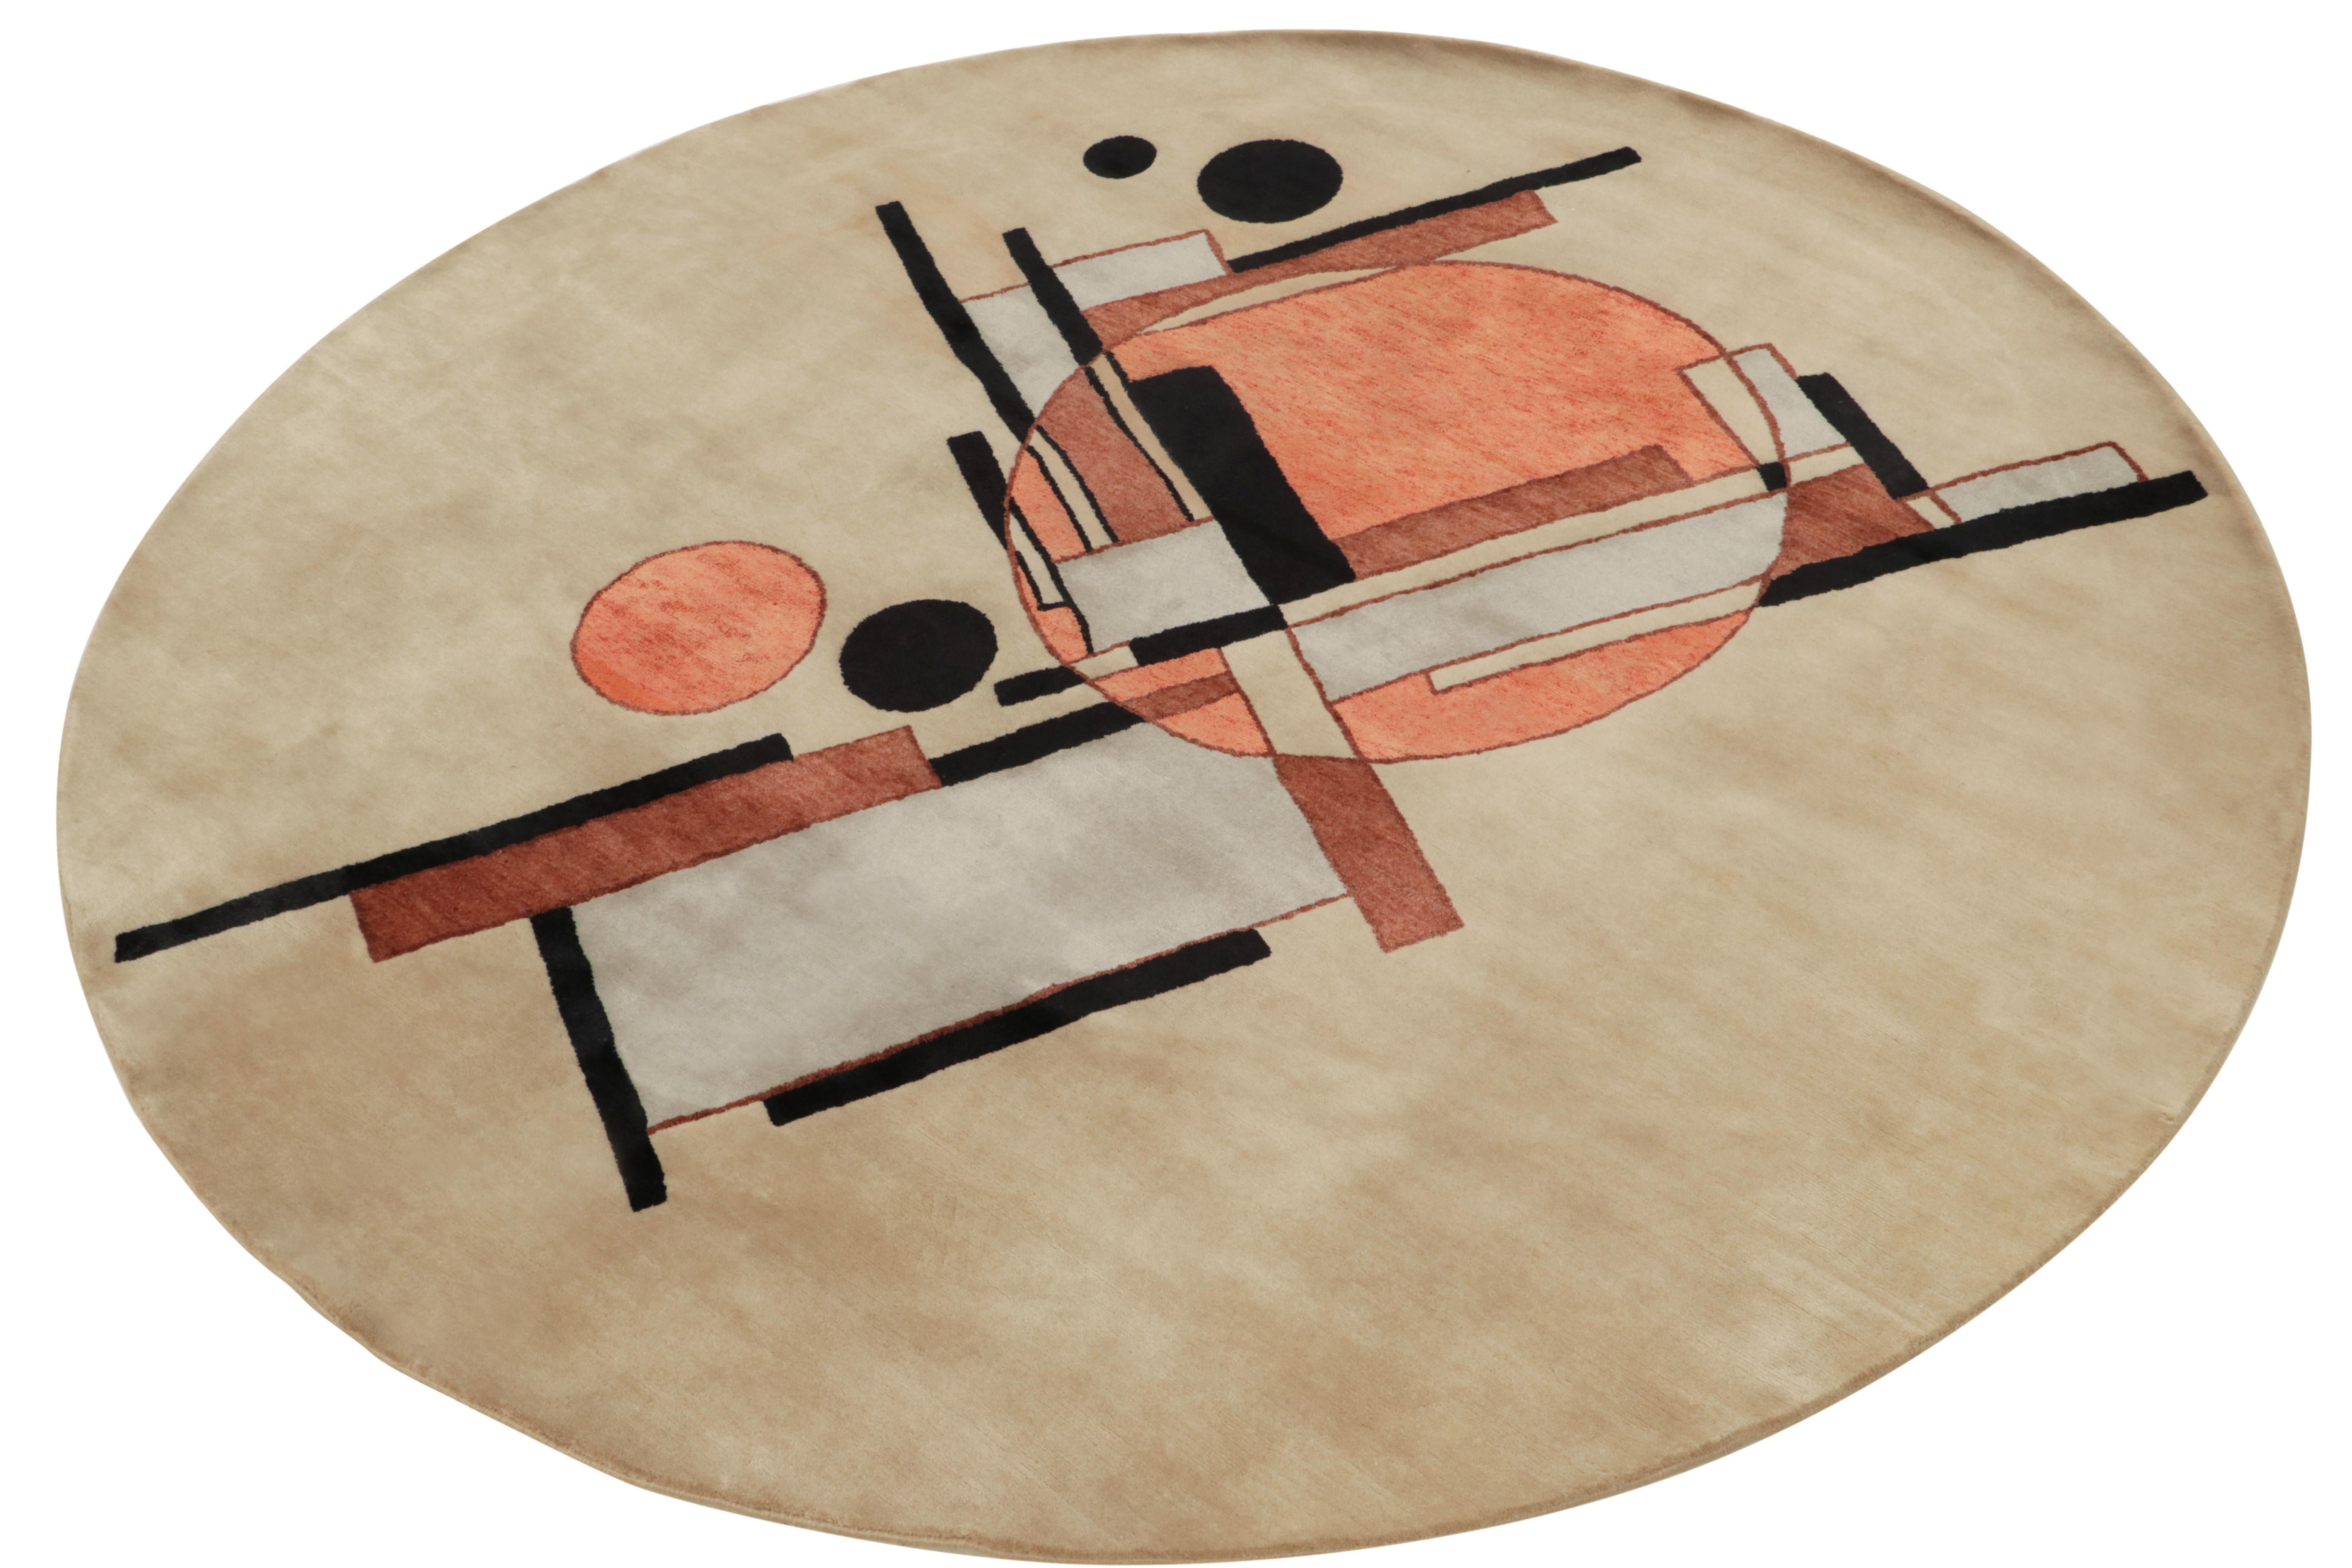 An 8’ contemporary piece from Rug & Kilim’s Deco Collection, inspired by the works of Kazimir Malevich in his suprematism style. The circle rug experiments with superimposition in high art given reverence in our new medium through exploring depth